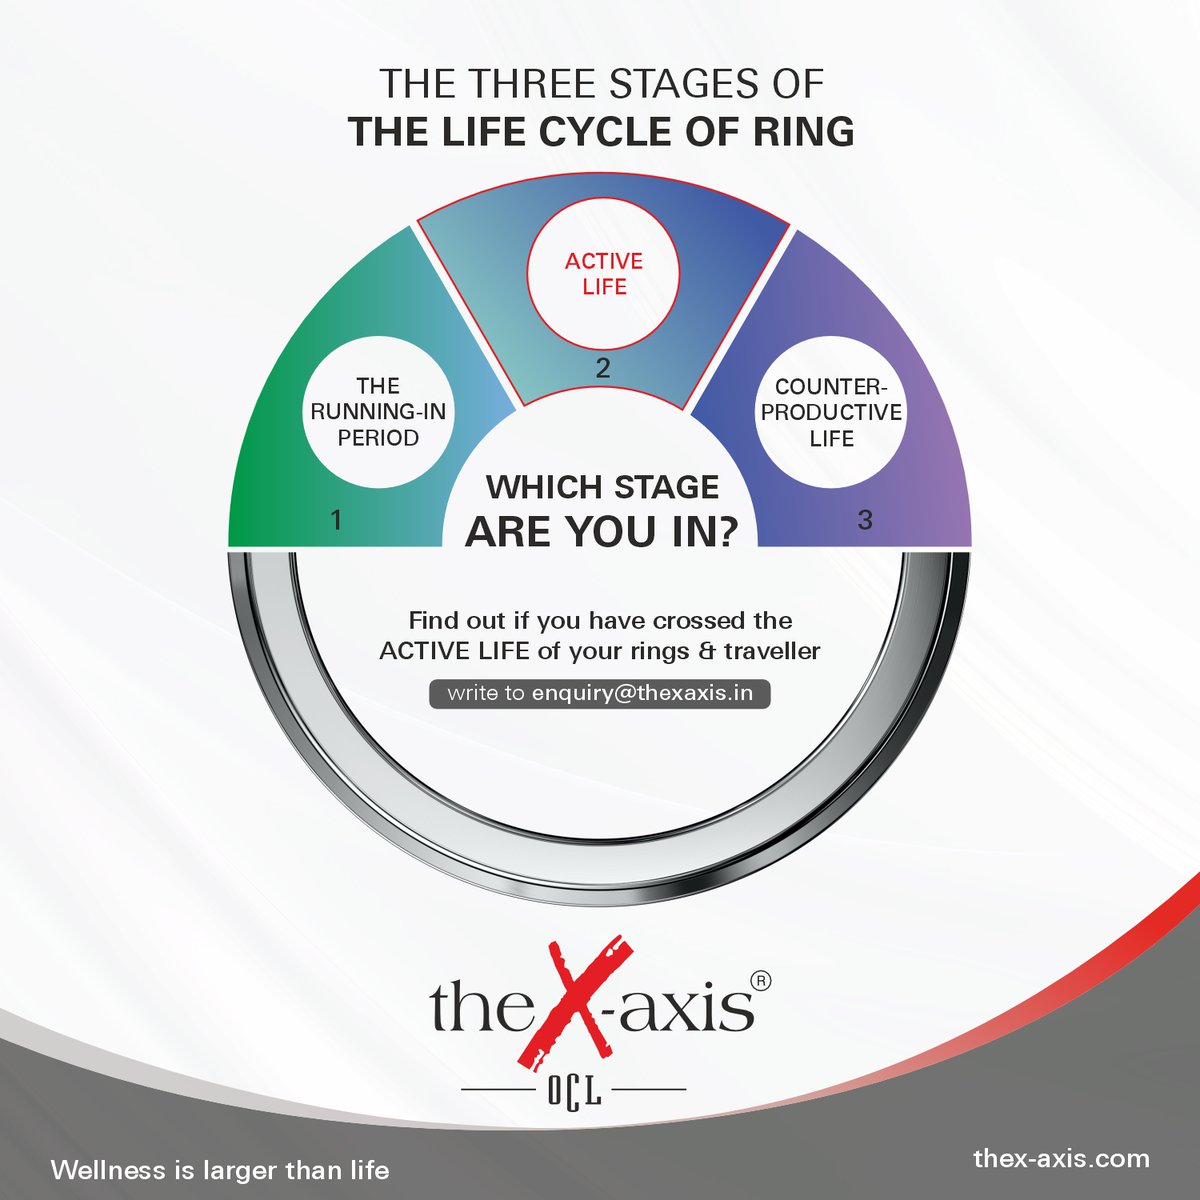 The life cycle of a #spinningring can be categories into three segments : The Running-in Period, #ActiveLife and the Counter-productive life.
WHICH STAGE ARE YOU IN?

#thexaxisindia #textilespinningrings #ringtravellers #spinningringsandtravellers #SpinningWellness